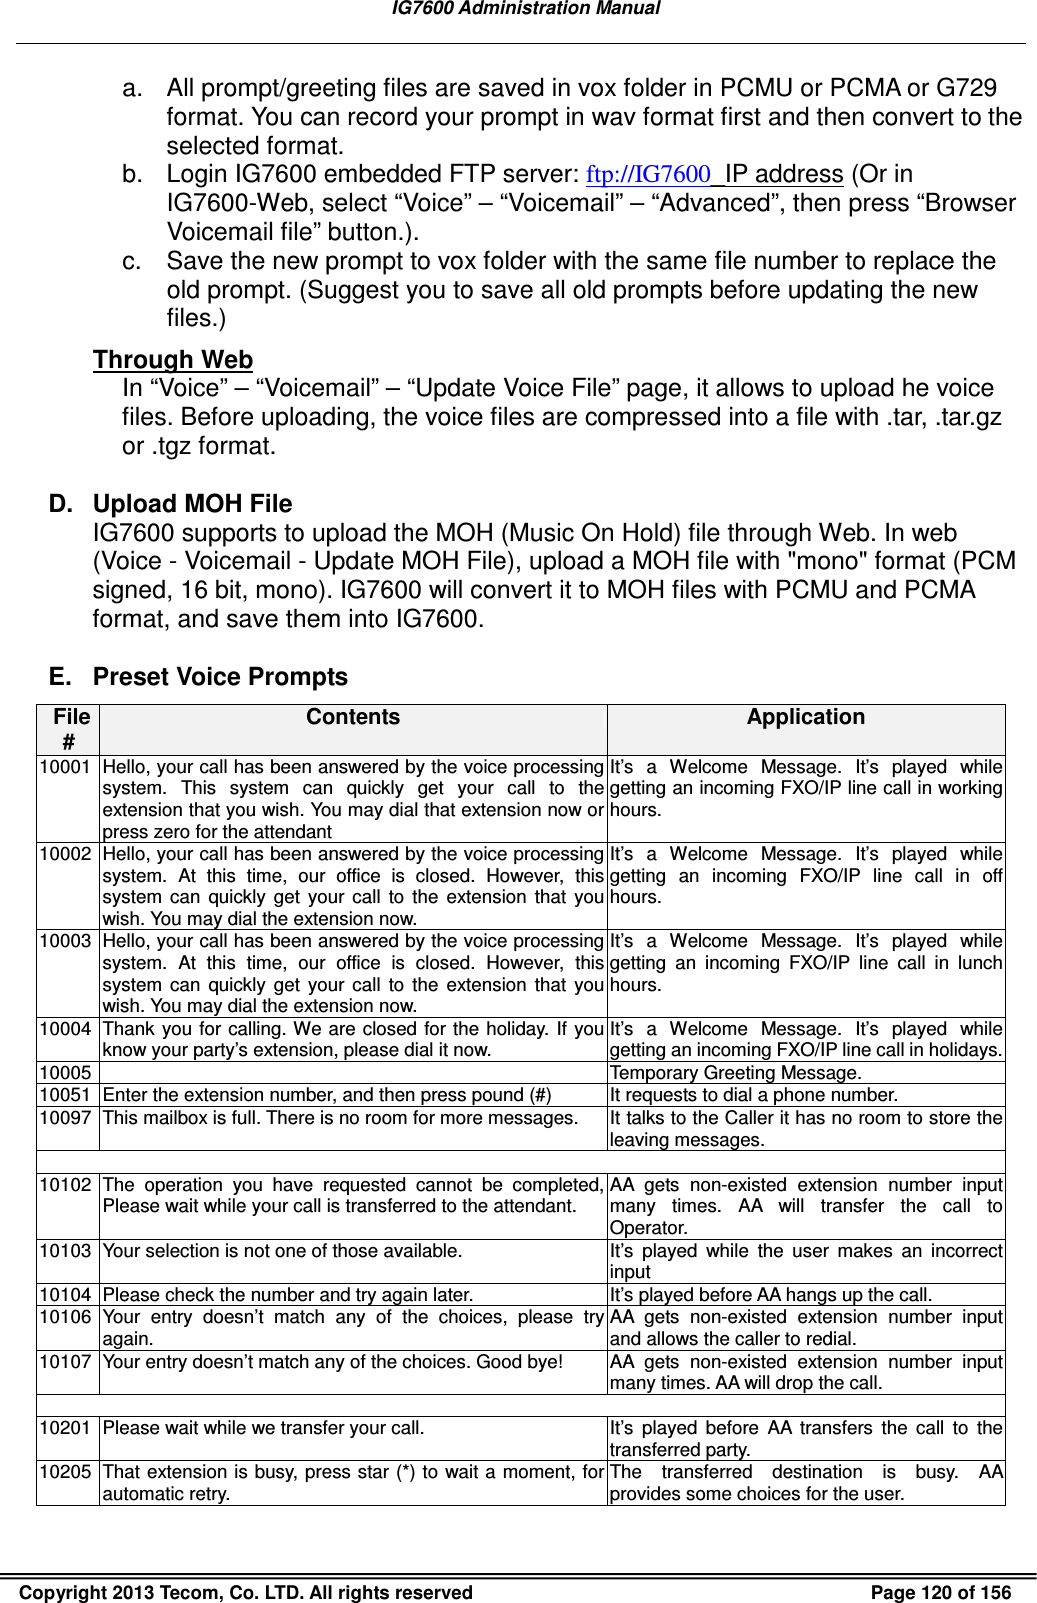   IG7600 Administration Manual  Copyright 2013 Tecom, Co. LTD. All rights reserved  Page 120 of 156 a.  All prompt/greeting files are saved in vox folder in PCMU or PCMA or G729 format. You can record your prompt in wav format first and then convert to the selected format.   b.  Login IG7600 embedded FTP server: ftp://IG7600_IP address (Or in IG7600-Web, select “Voice” – “Voicemail” – “Advanced”, then press “Browser Voicemail file” button.).   c.  Save the new prompt to vox folder with the same file number to replace the old prompt. (Suggest you to save all old prompts before updating the new files.) Through Web In “Voice” – “Voicemail” – “Update Voice File” page, it allows to upload he voice files. Before uploading, the voice files are compressed into a file with .tar, .tar.gz or .tgz format. D.  Upload MOH File IG7600 supports to upload the MOH (Music On Hold) file through Web. In web (Voice - Voicemail - Update MOH File), upload a MOH file with &quot;mono&quot; format (PCM signed, 16 bit, mono). IG7600 will convert it to MOH files with PCMU and PCMA format, and save them into IG7600. E.  Preset Voice Prompts File# Contents  Application 10001 Hello, your call has been answered by the voice processing system.  This  system  can  quickly  get  your  call  to  the extension that you wish. You may dial that extension now or press zero for the attendant It’s  a  Welcome  Message.  It’s  played  while getting an incoming FXO/IP line call in working hours. 10002 Hello, your call has been answered by the voice processing system.  At  this  time,  our  office  is  closed.  However,  this system  can  quickly  get  your  call  to  the  extension  that  you wish. You may dial the extension now.   It’s  a  Welcome  Message.  It’s  played  while getting  an  incoming  FXO/IP  line  call  in  off hours. 10003 Hello, your call has been answered by the voice processing system.  At  this  time,  our  office  is  closed.  However,  this system  can  quickly  get  your  call  to  the  extension  that  you wish. You may dial the extension now.   It’s  a  Welcome  Message.  It’s  played  while getting  an  incoming  FXO/IP  line  call  in  lunch hours. 10004 Thank you for calling. We are  closed for the holiday. If you know your party’s extension, please dial it now.   It’s  a  Welcome  Message.  It’s  played  while getting an incoming FXO/IP line call in holidays. 10005   Temporary Greeting Message. 10051 Enter the extension number, and then press pound (#)  It requests to dial a phone number. 10097 This mailbox is full. There is no room for more messages. It talks to the Caller it has no room to store the leaving messages.                                                                                                                                                                                       10102 The  operation  you  have  requested  cannot  be  completed,   Please wait while your call is transferred to the attendant. AA  gets  non-existed  extension  number  input many  times.  AA  will  transfer  the  call  to Operator. 10103 Your selection is not one of those available. It’s  played  while  the  user  makes  an  incorrect input 10104 Please check the number and try again later.  It’s played before AA hangs up the call. 10106 Your  entry  doesn’t  match  any  of  the  choices,  please  try again. AA  gets  non-existed  extension  number  input and allows the caller to redial. 10107 Your entry doesn’t match any of the choices. Good bye!  AA  gets  non-existed  extension  number  input many times. AA will drop the call.  10201 Please wait while we transfer your call. It’s  played  before  AA  transfers  the  call  to  the transferred party. 10205 That extension is busy, press star (*) to wait a moment, for automatic retry. The  transferred destination  is  busy.  AA provides some choices for the user. 